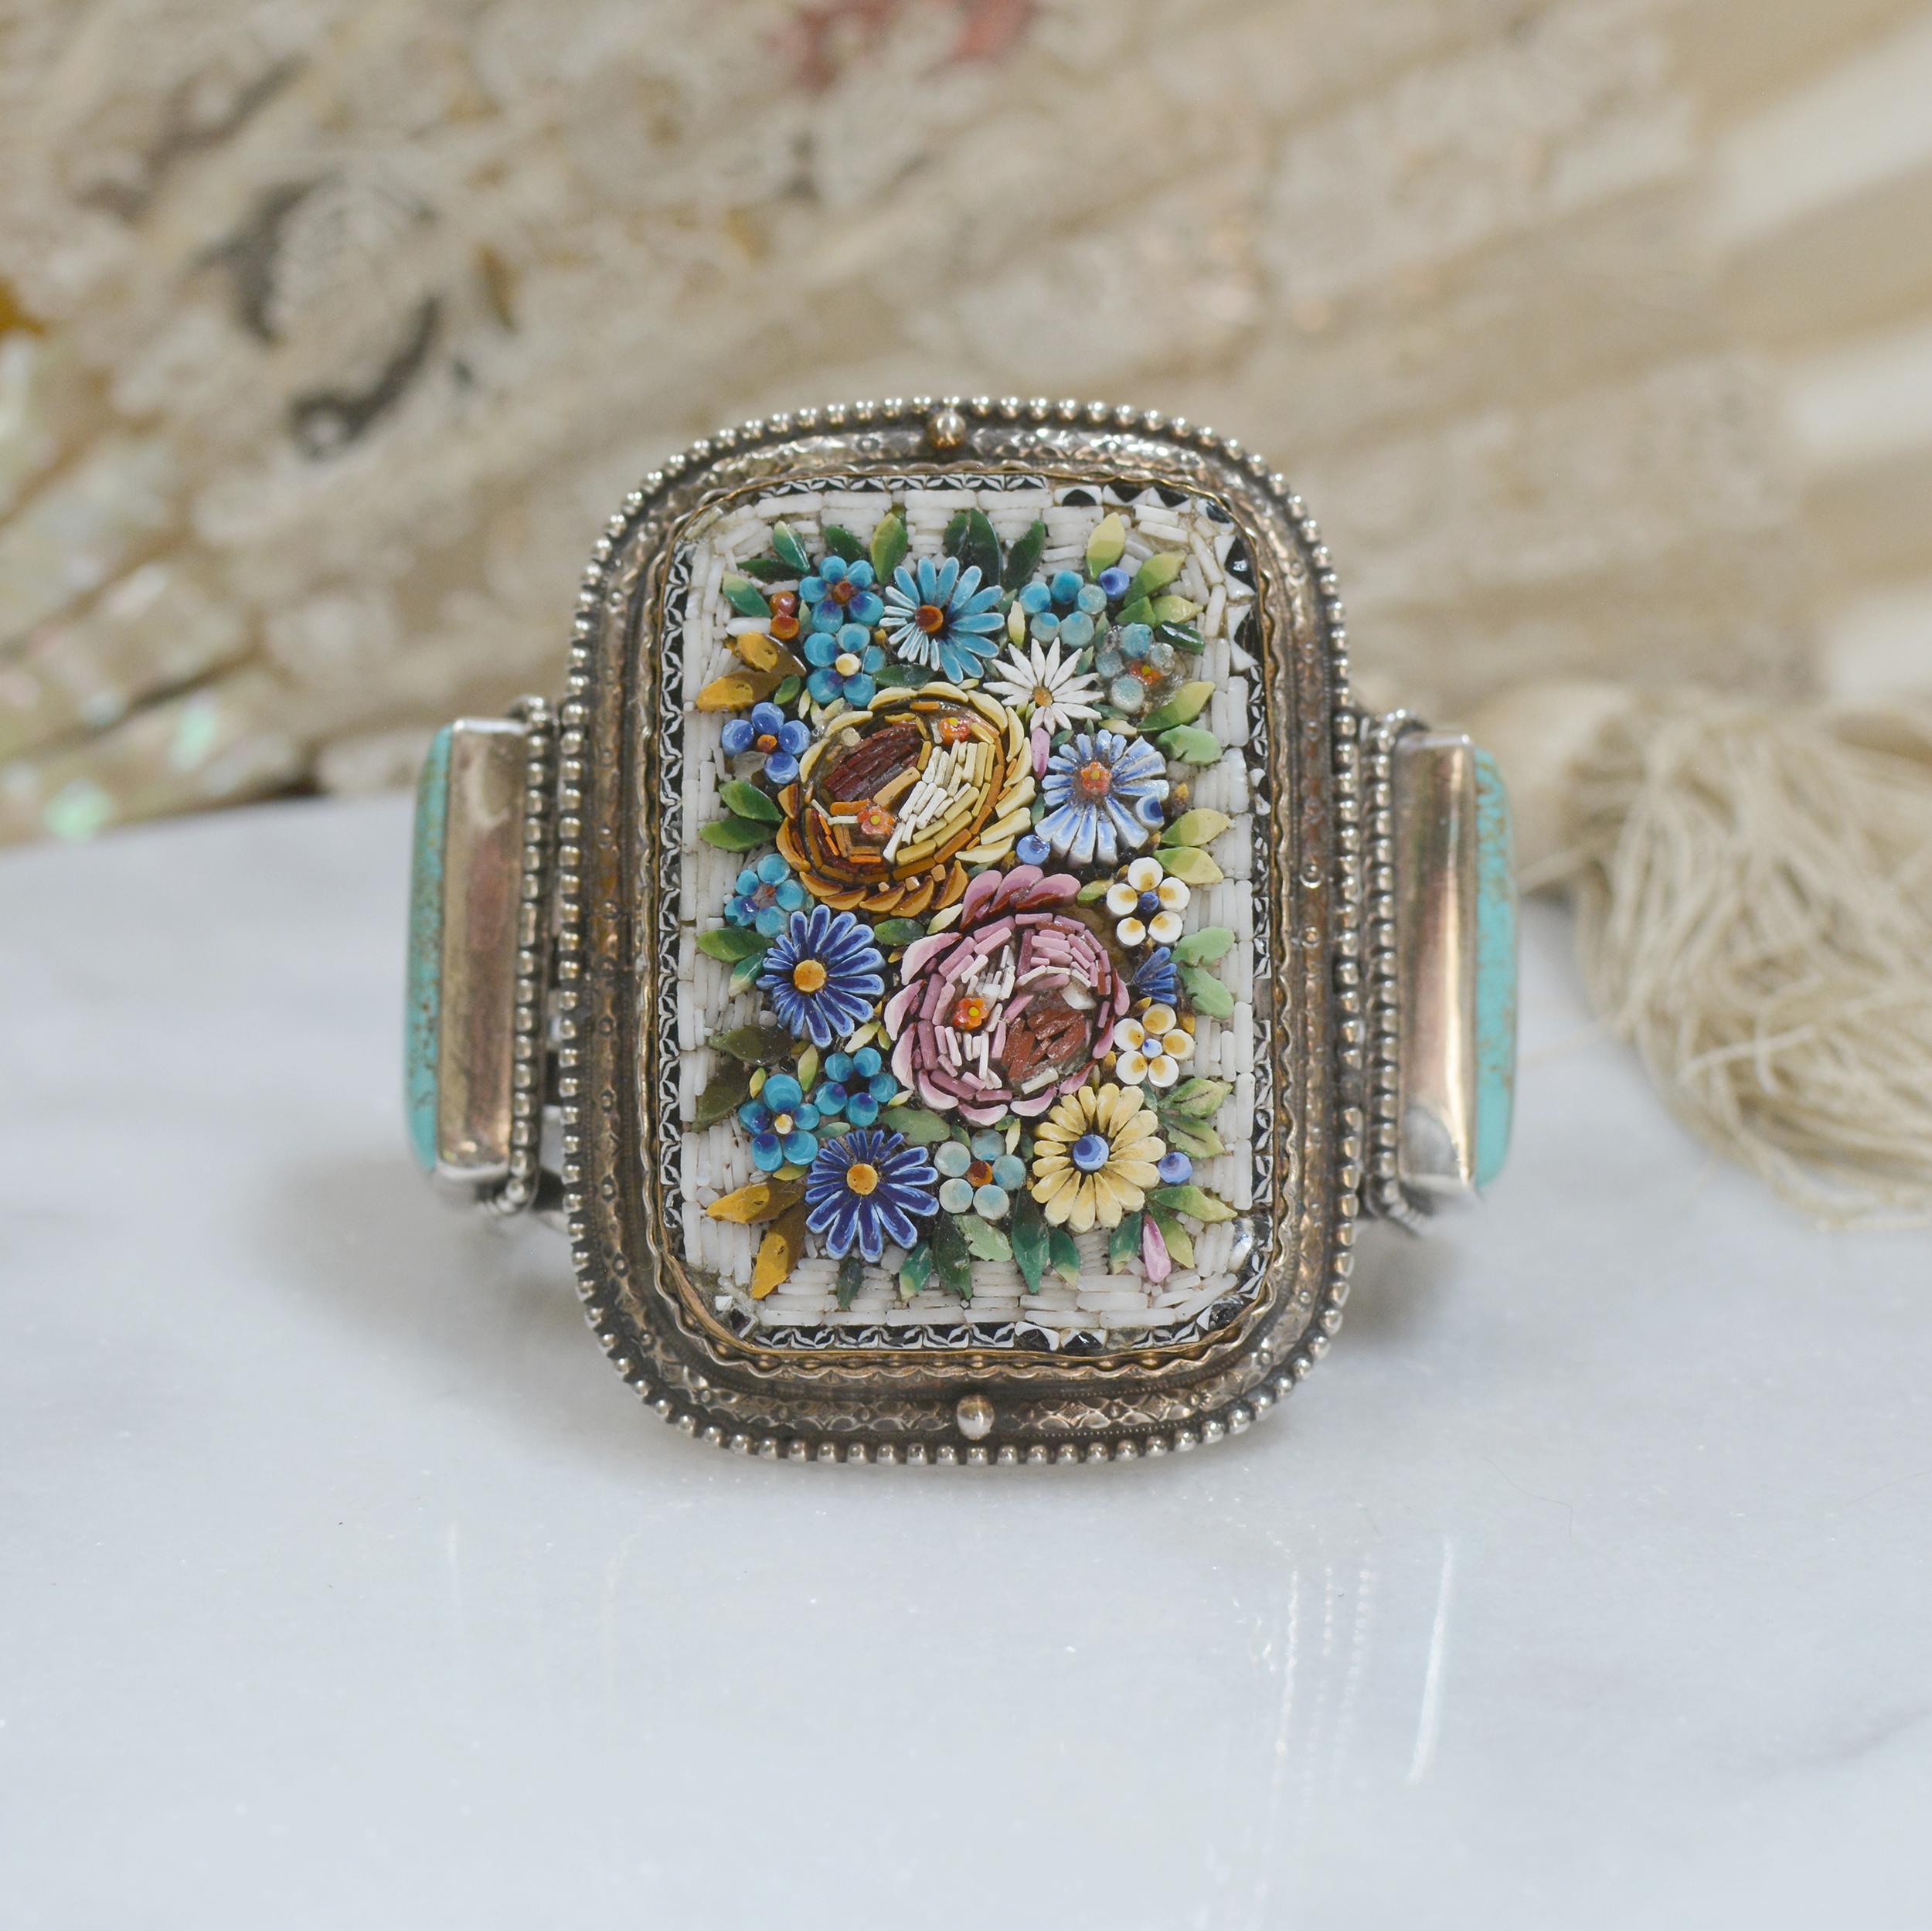 This divine, one of a kind cuff bracelet is designed with a large nineteenth century Grand Tour - Venetian micro-mosaic floral bouquet masterpiece. Mounted within original gold vermeil mounting, which has been meticulously transformed with an